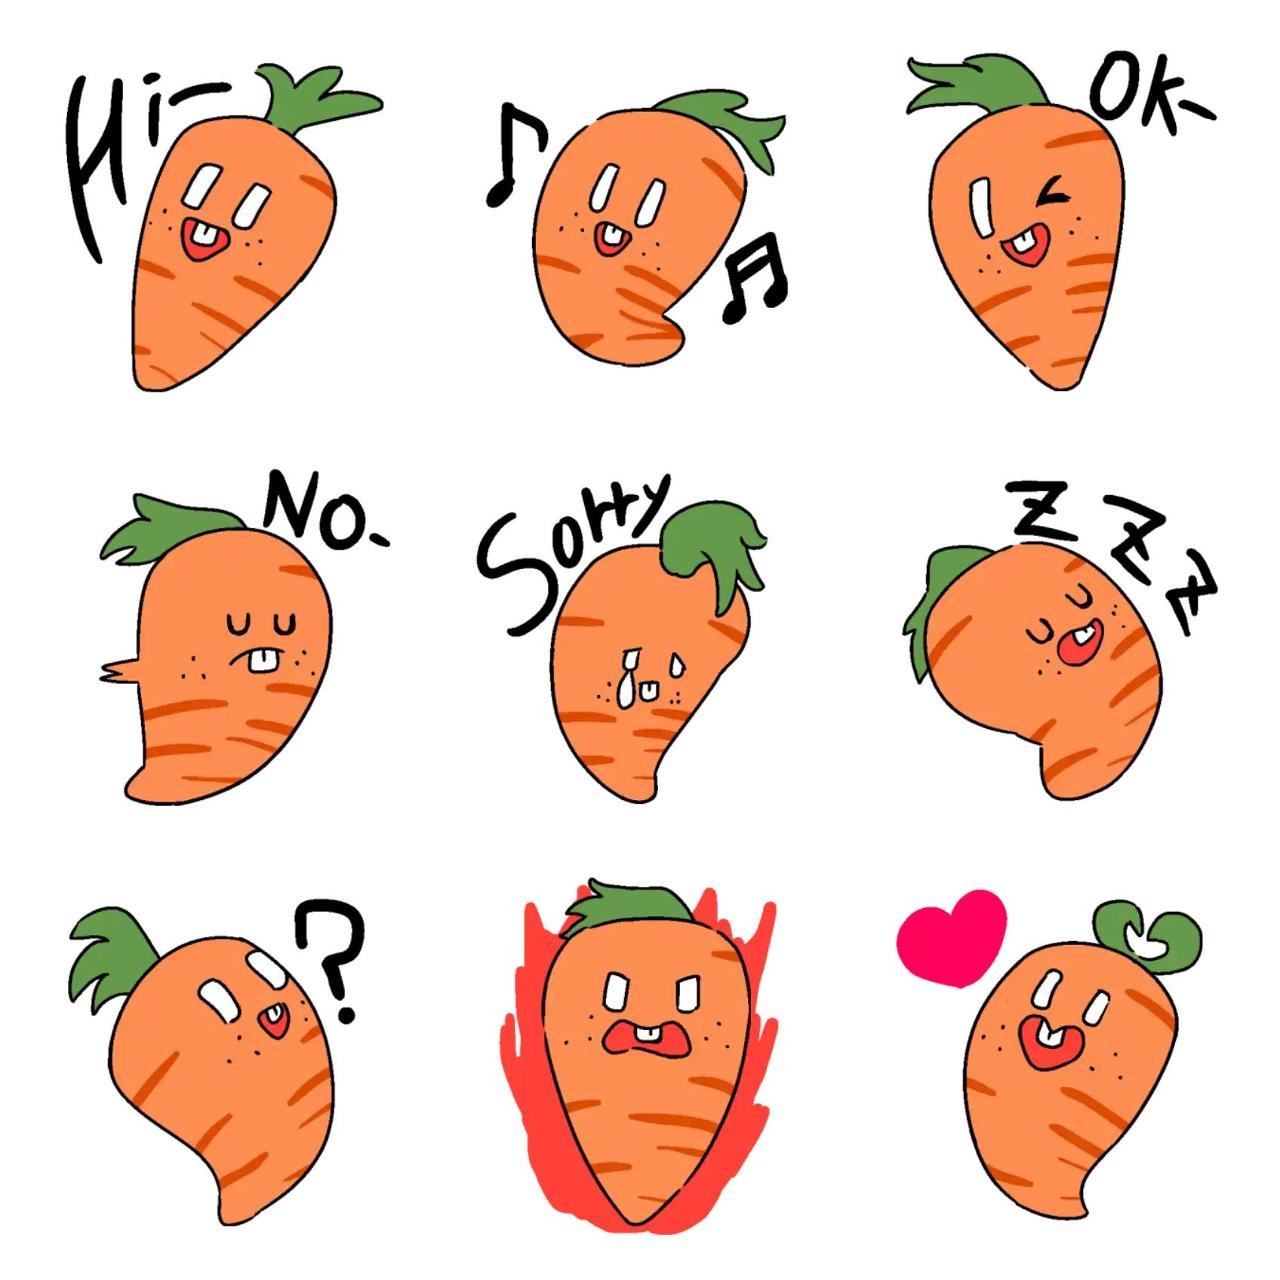 Emotions of a carrot Animation/Cartoon,Food/Drink sticker pack for Whatsapp, Telegram, Signal, and others chatting and message apps